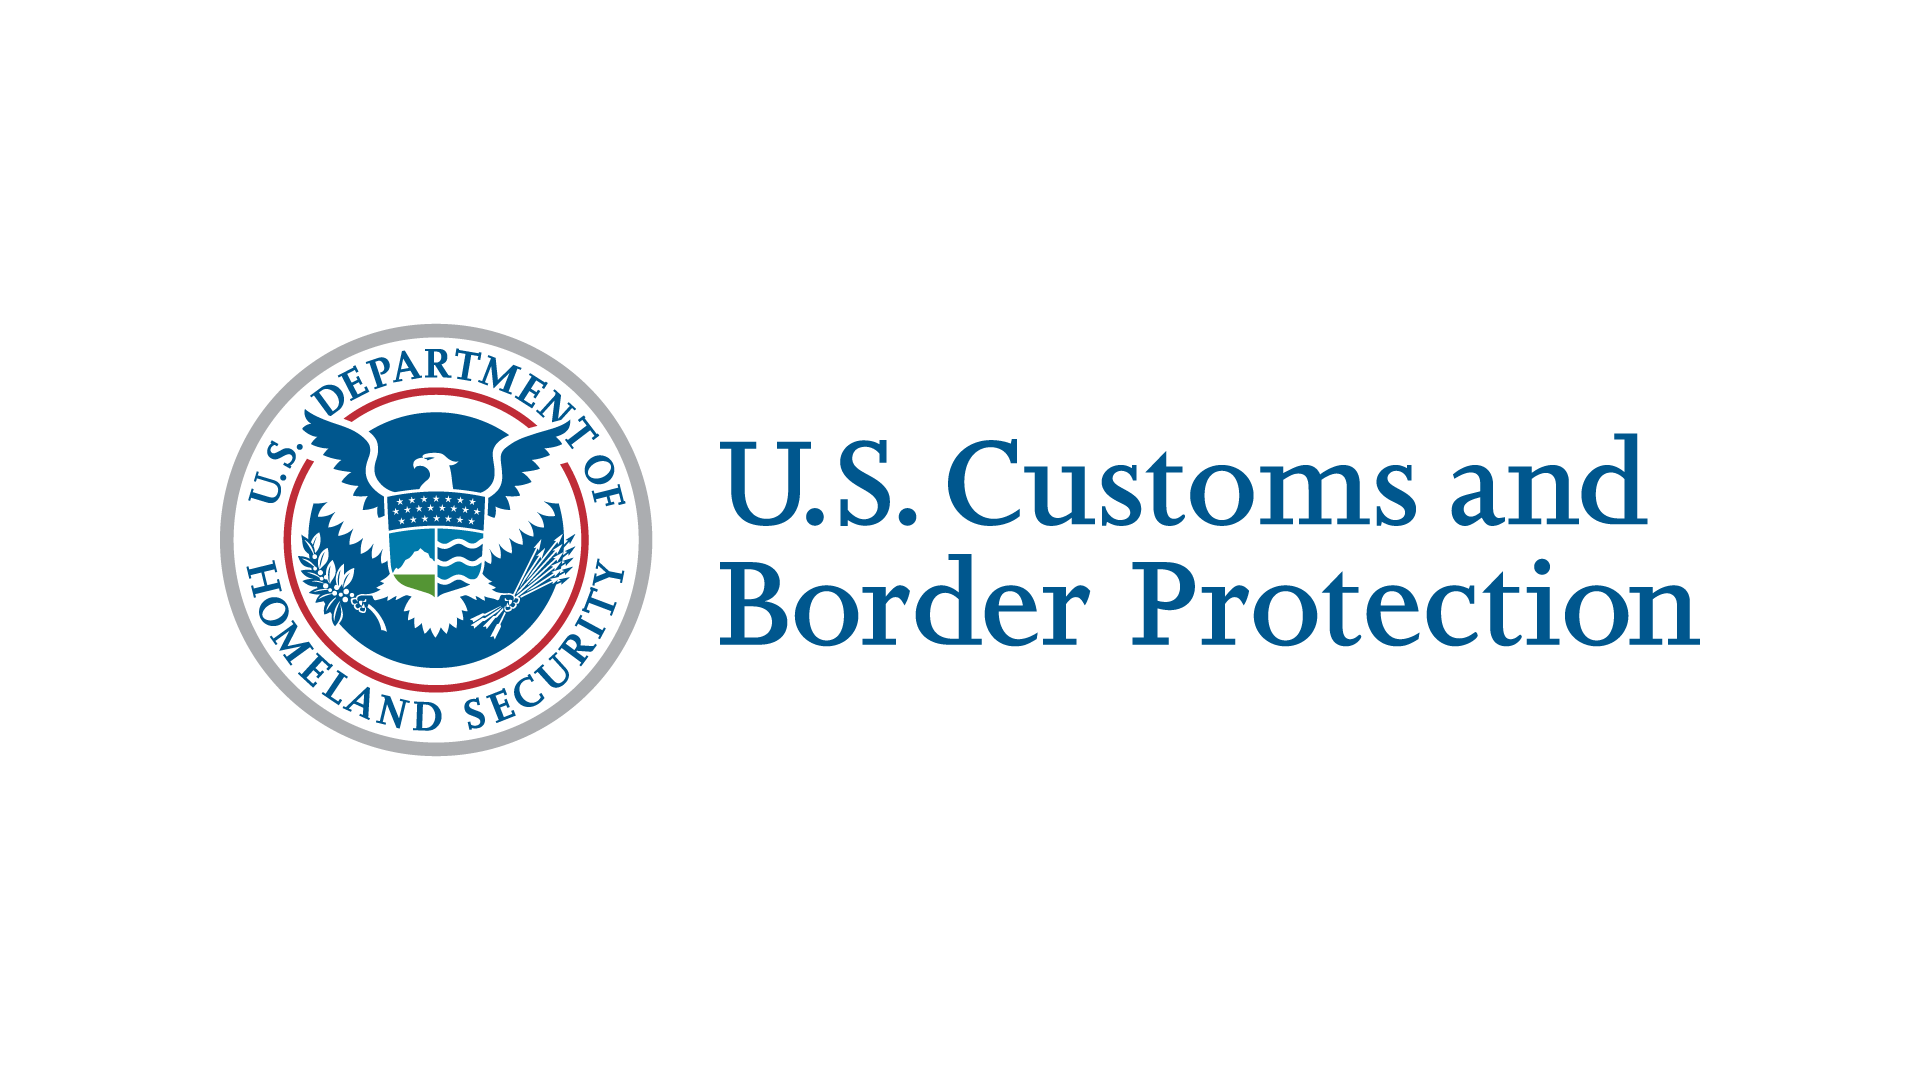 Customs and Border Protection Logo - US Customs and Border Protection Ring the NYSE Opening Bell®